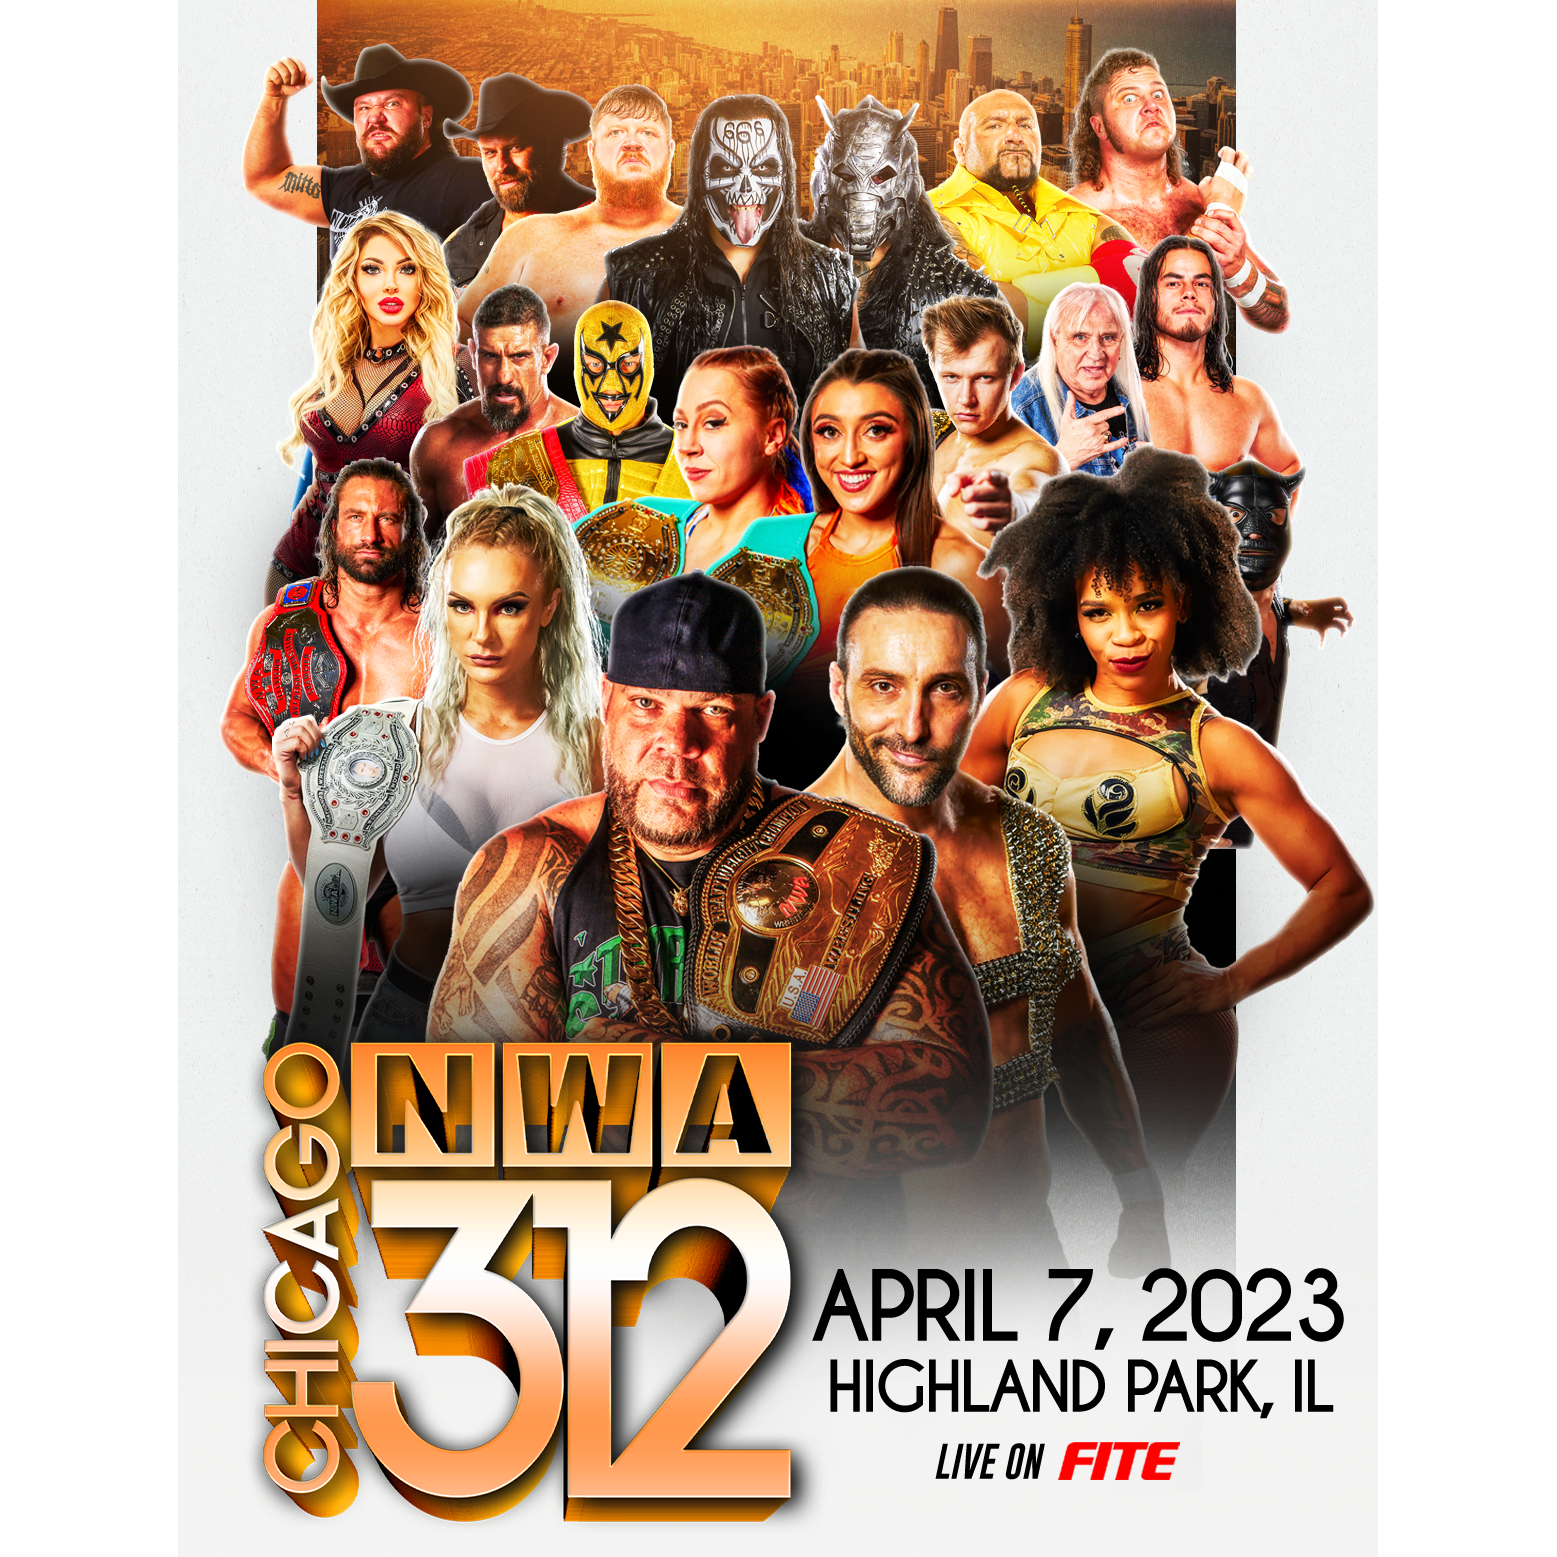 The NWA 312 poster